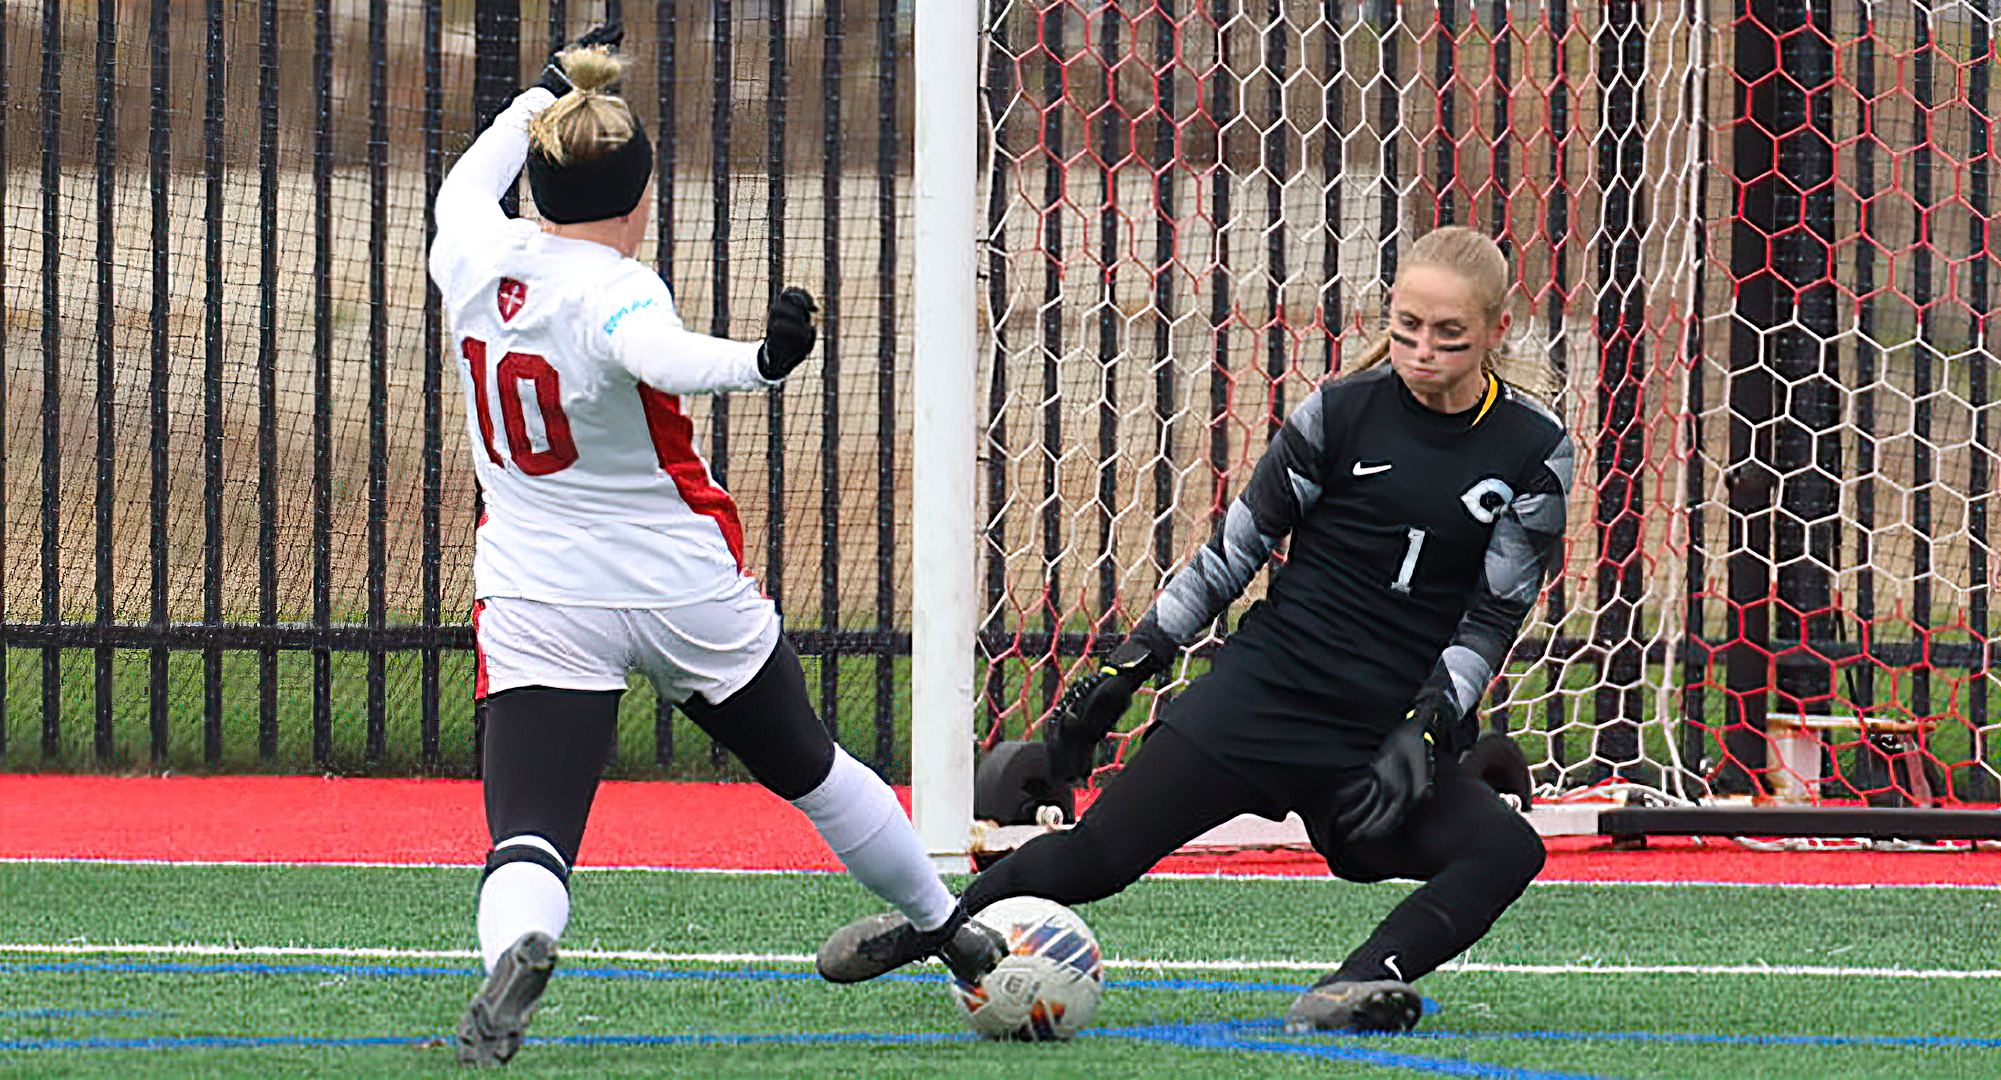 Senior goalie Bre Nelson makes one of her nine saves in the Cobbers' 2-0 win at St. Ben's in the quarterfinals of the MIAC playoffs.